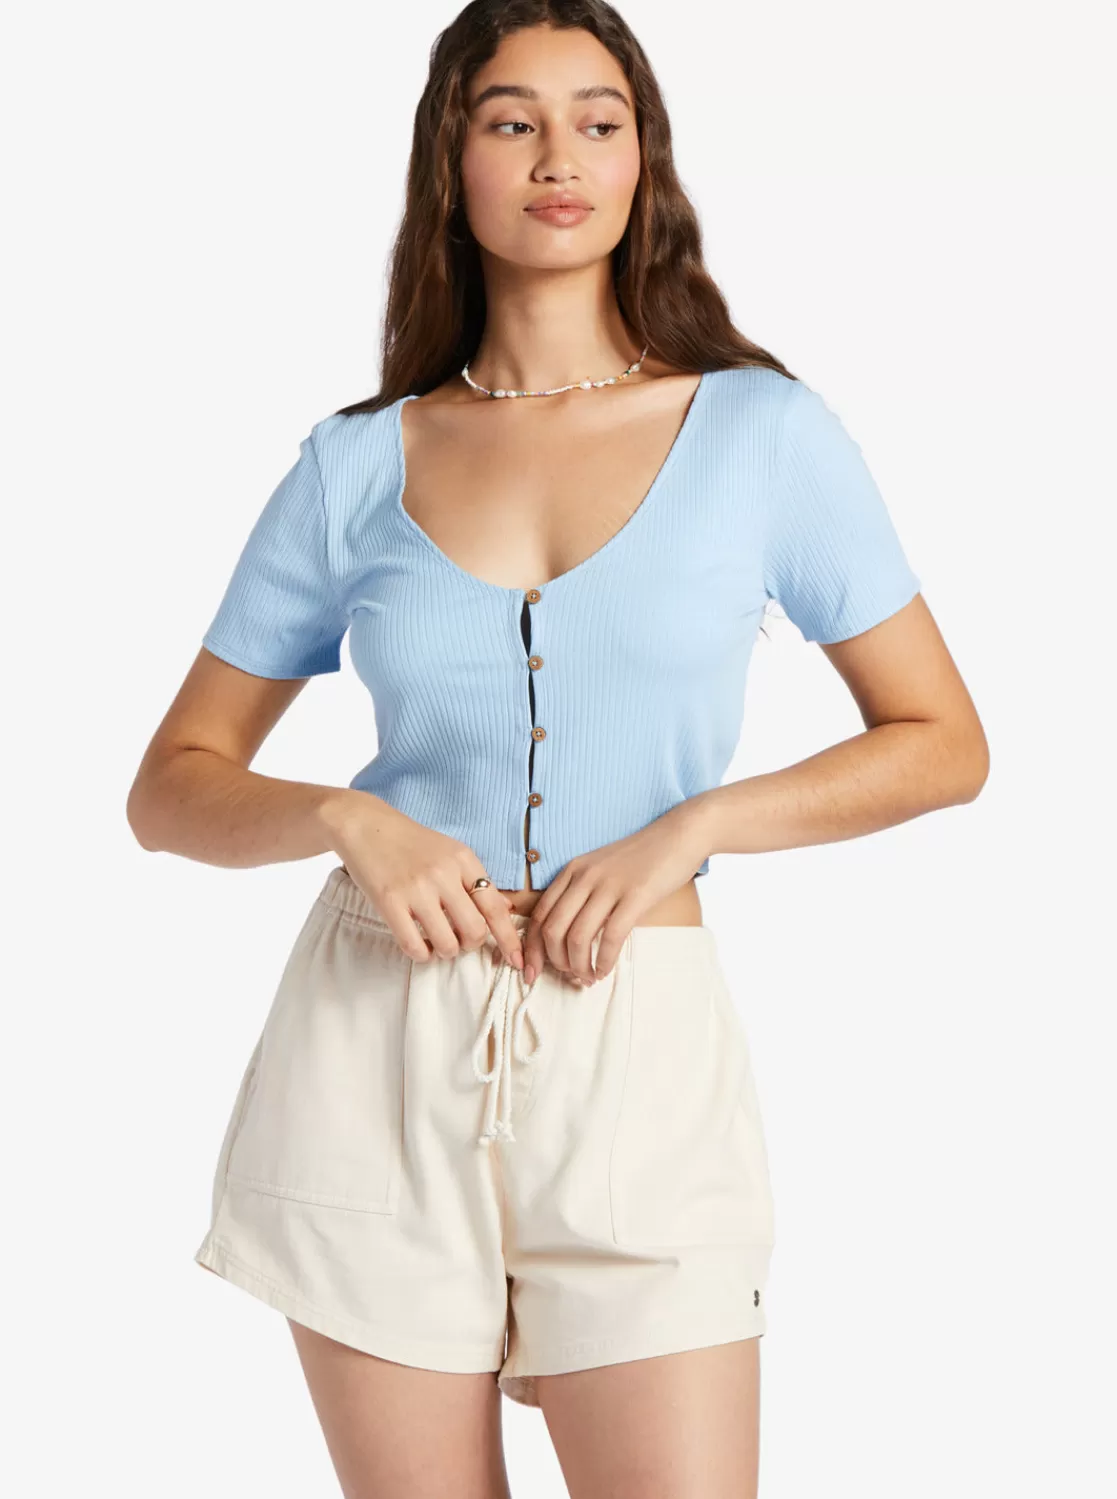 Born With It Crop Top-ROXY New